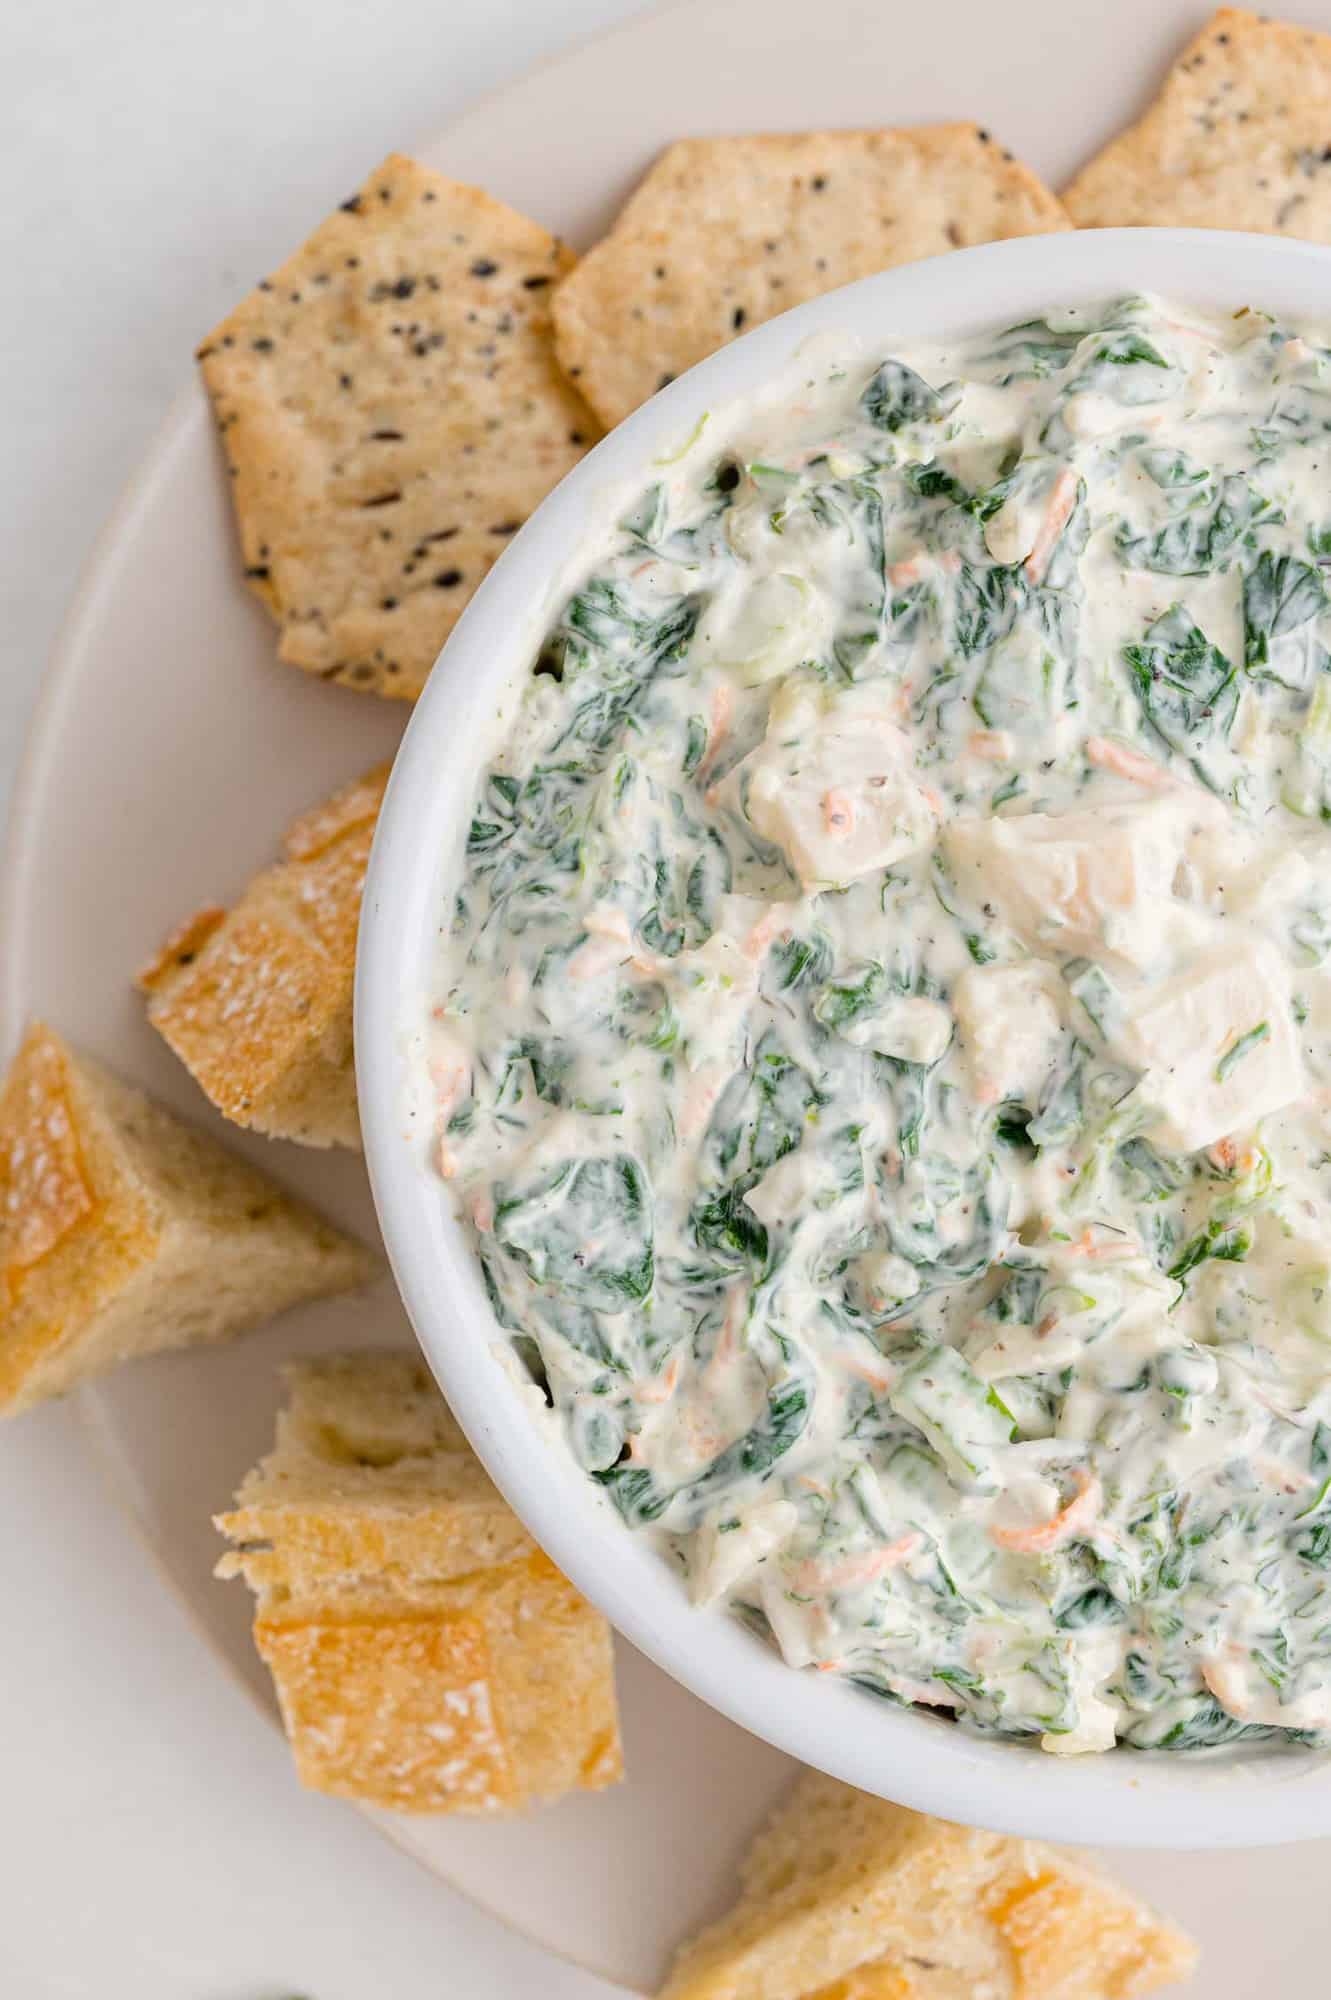 Spinach dip in a bowl surrounded by crackers.